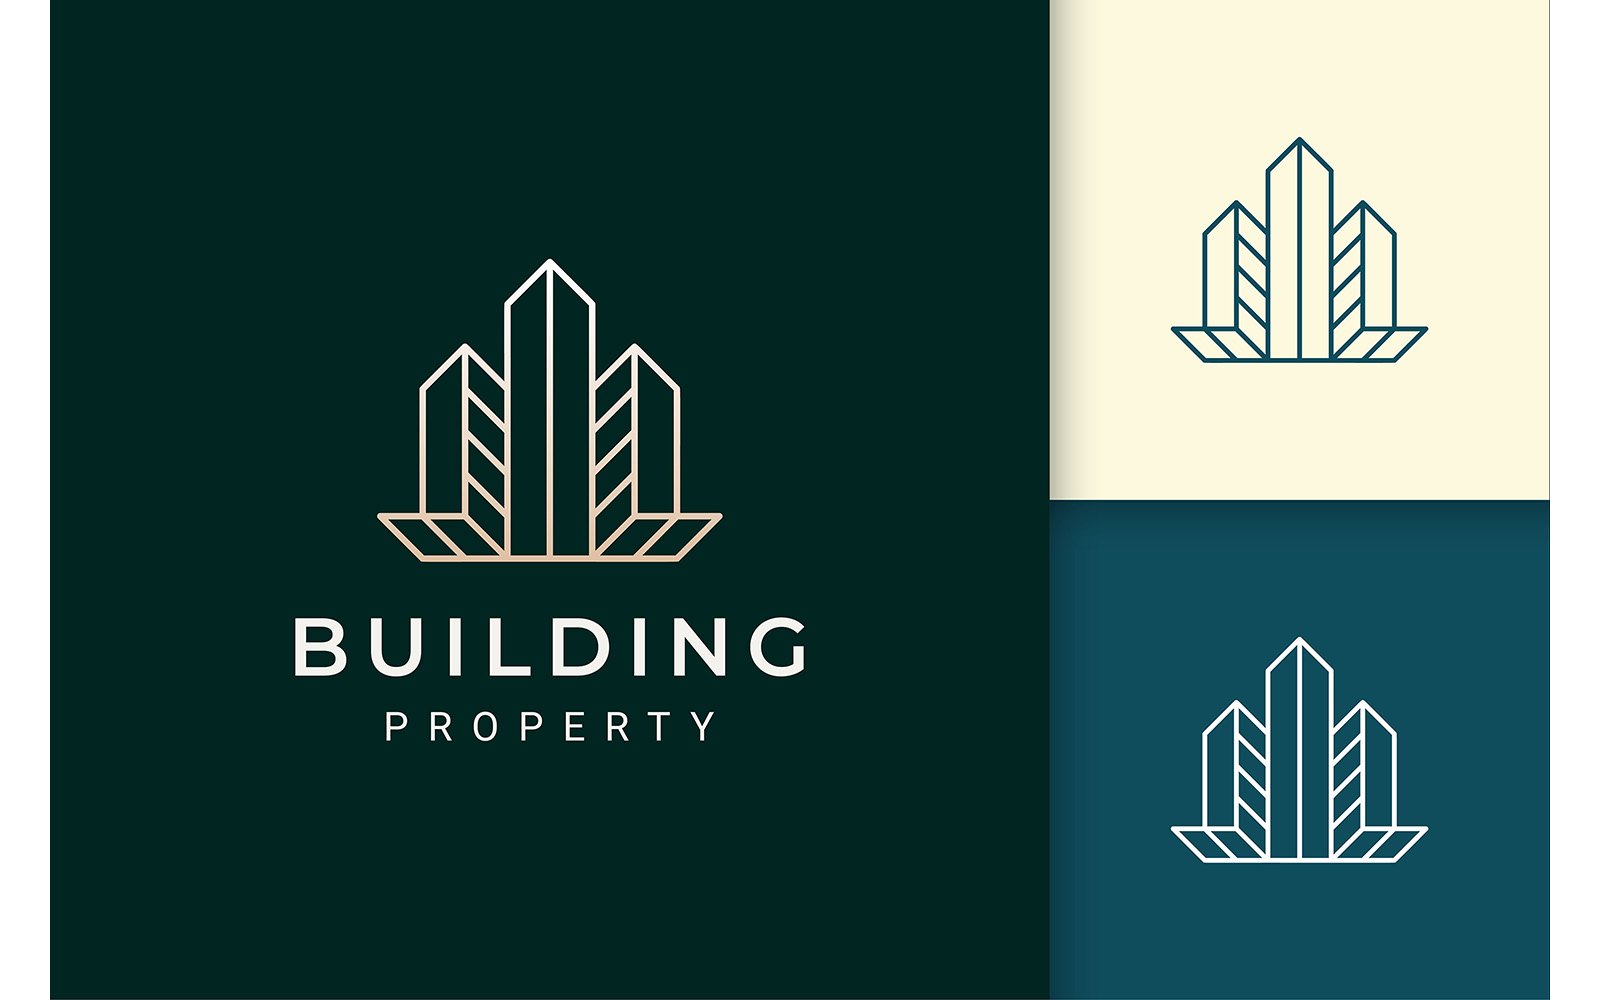 Apartment or Real Estate Logo Template